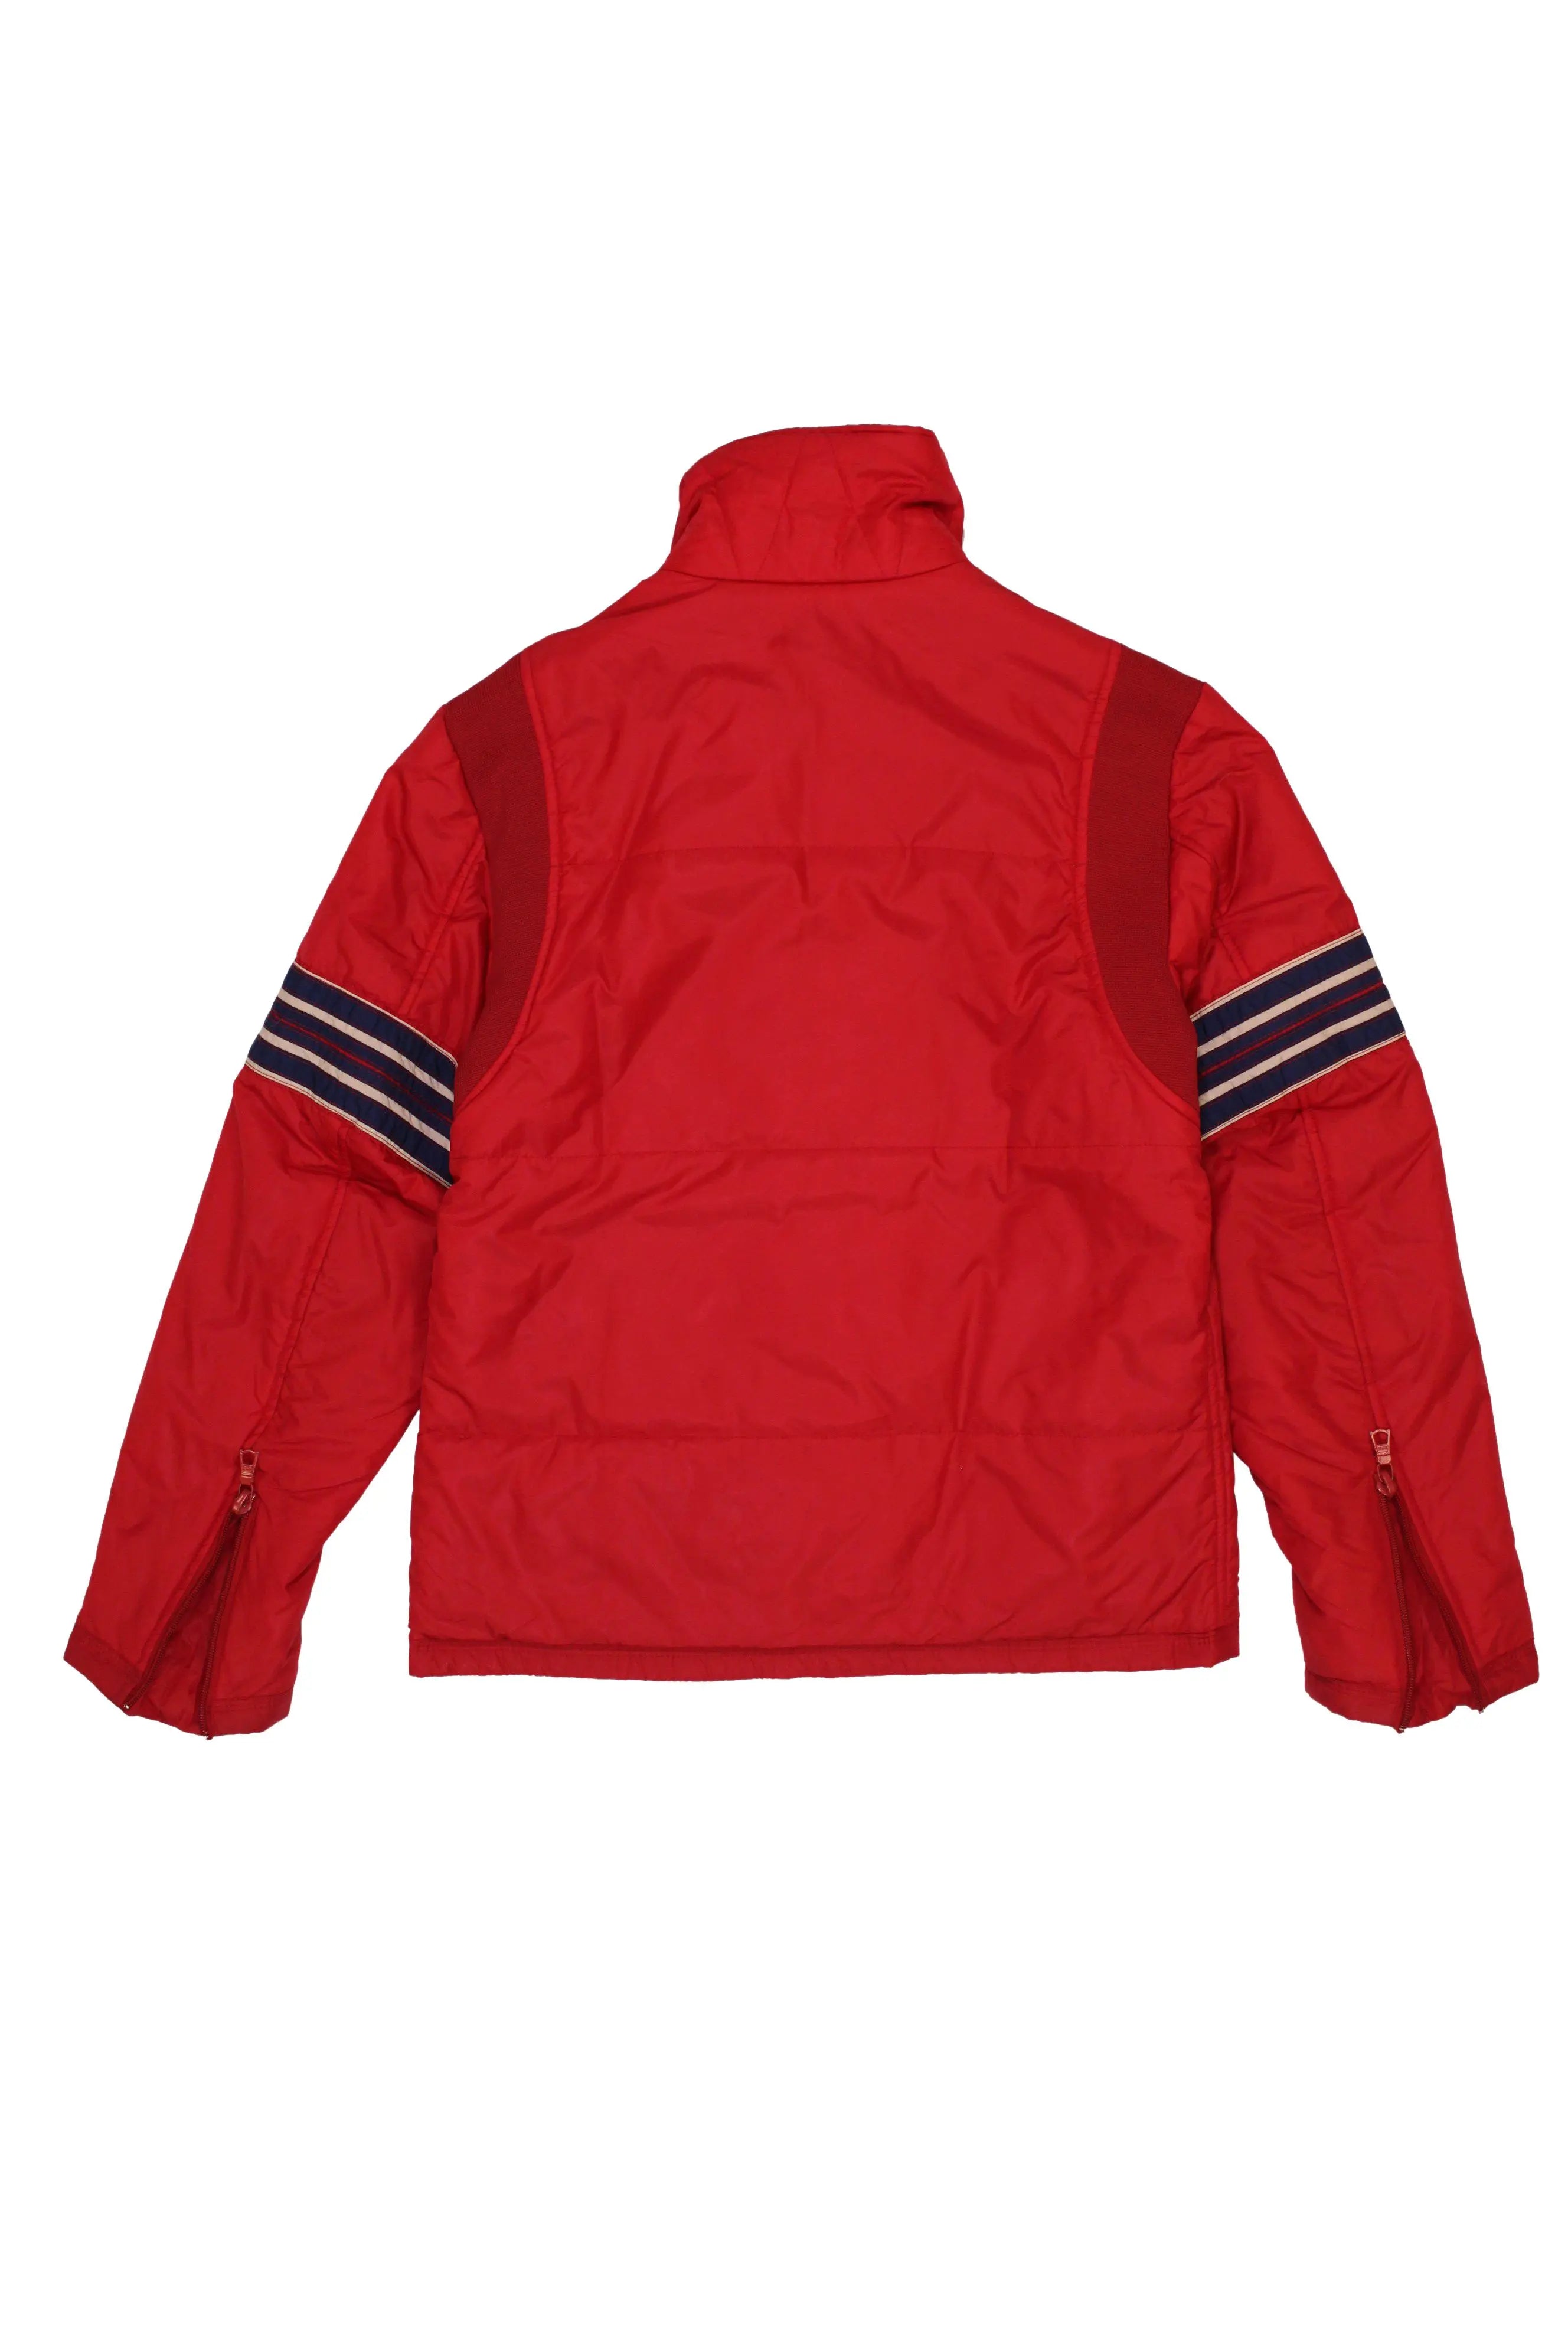 Gas Collection - Bright Red Coat- ThriftTale.com - Vintage and second handclothing